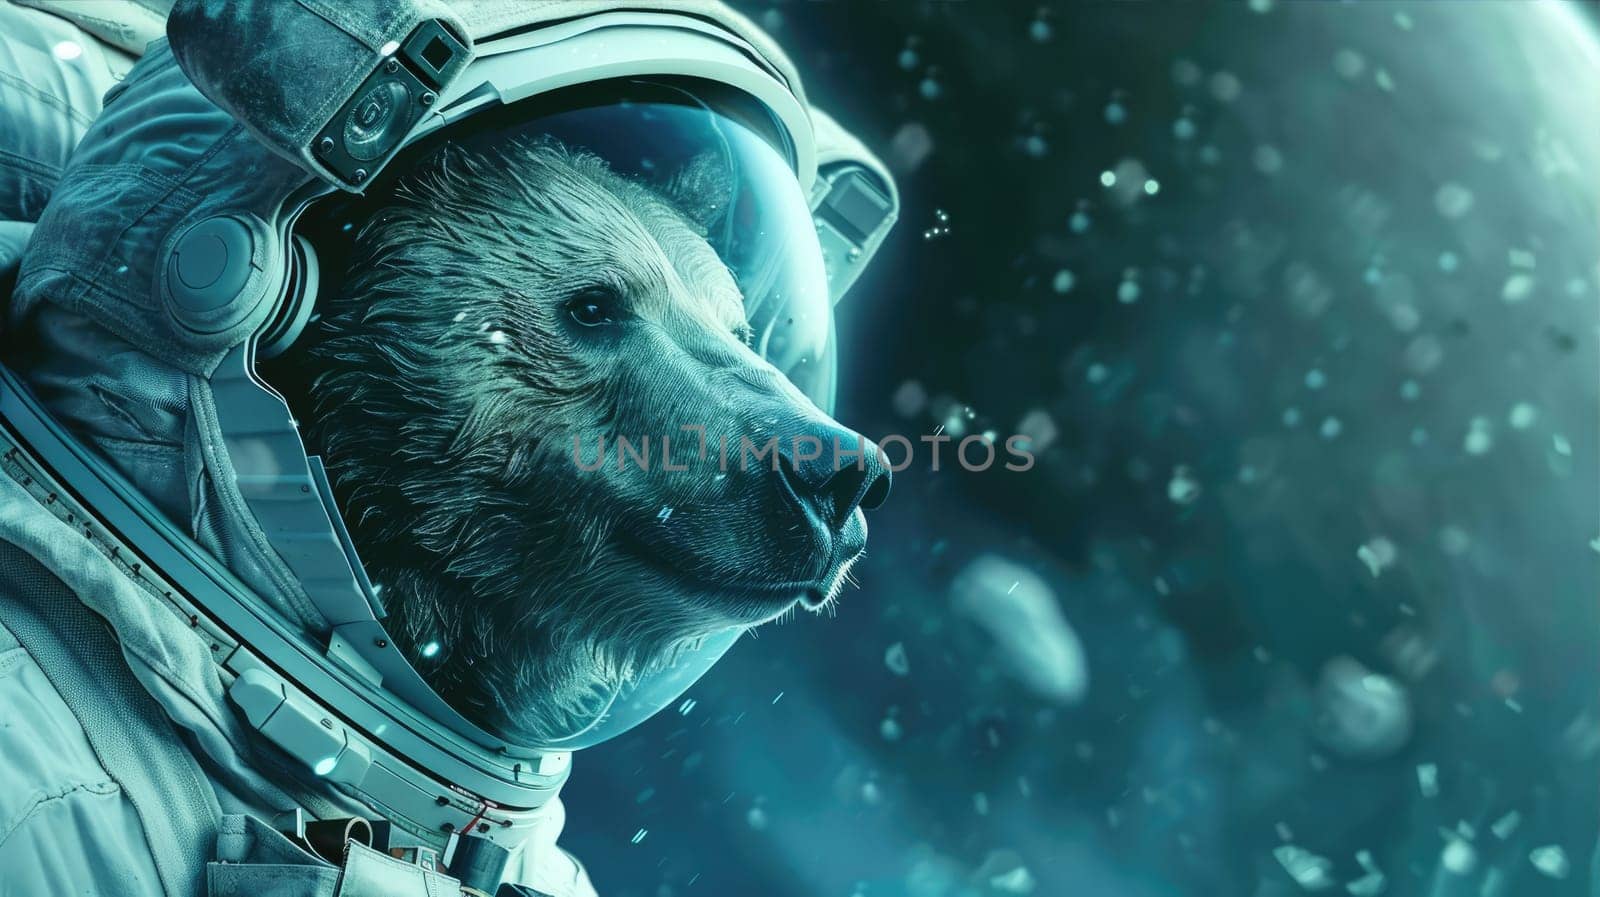 A bear travels through space like an astronaut by natali_brill